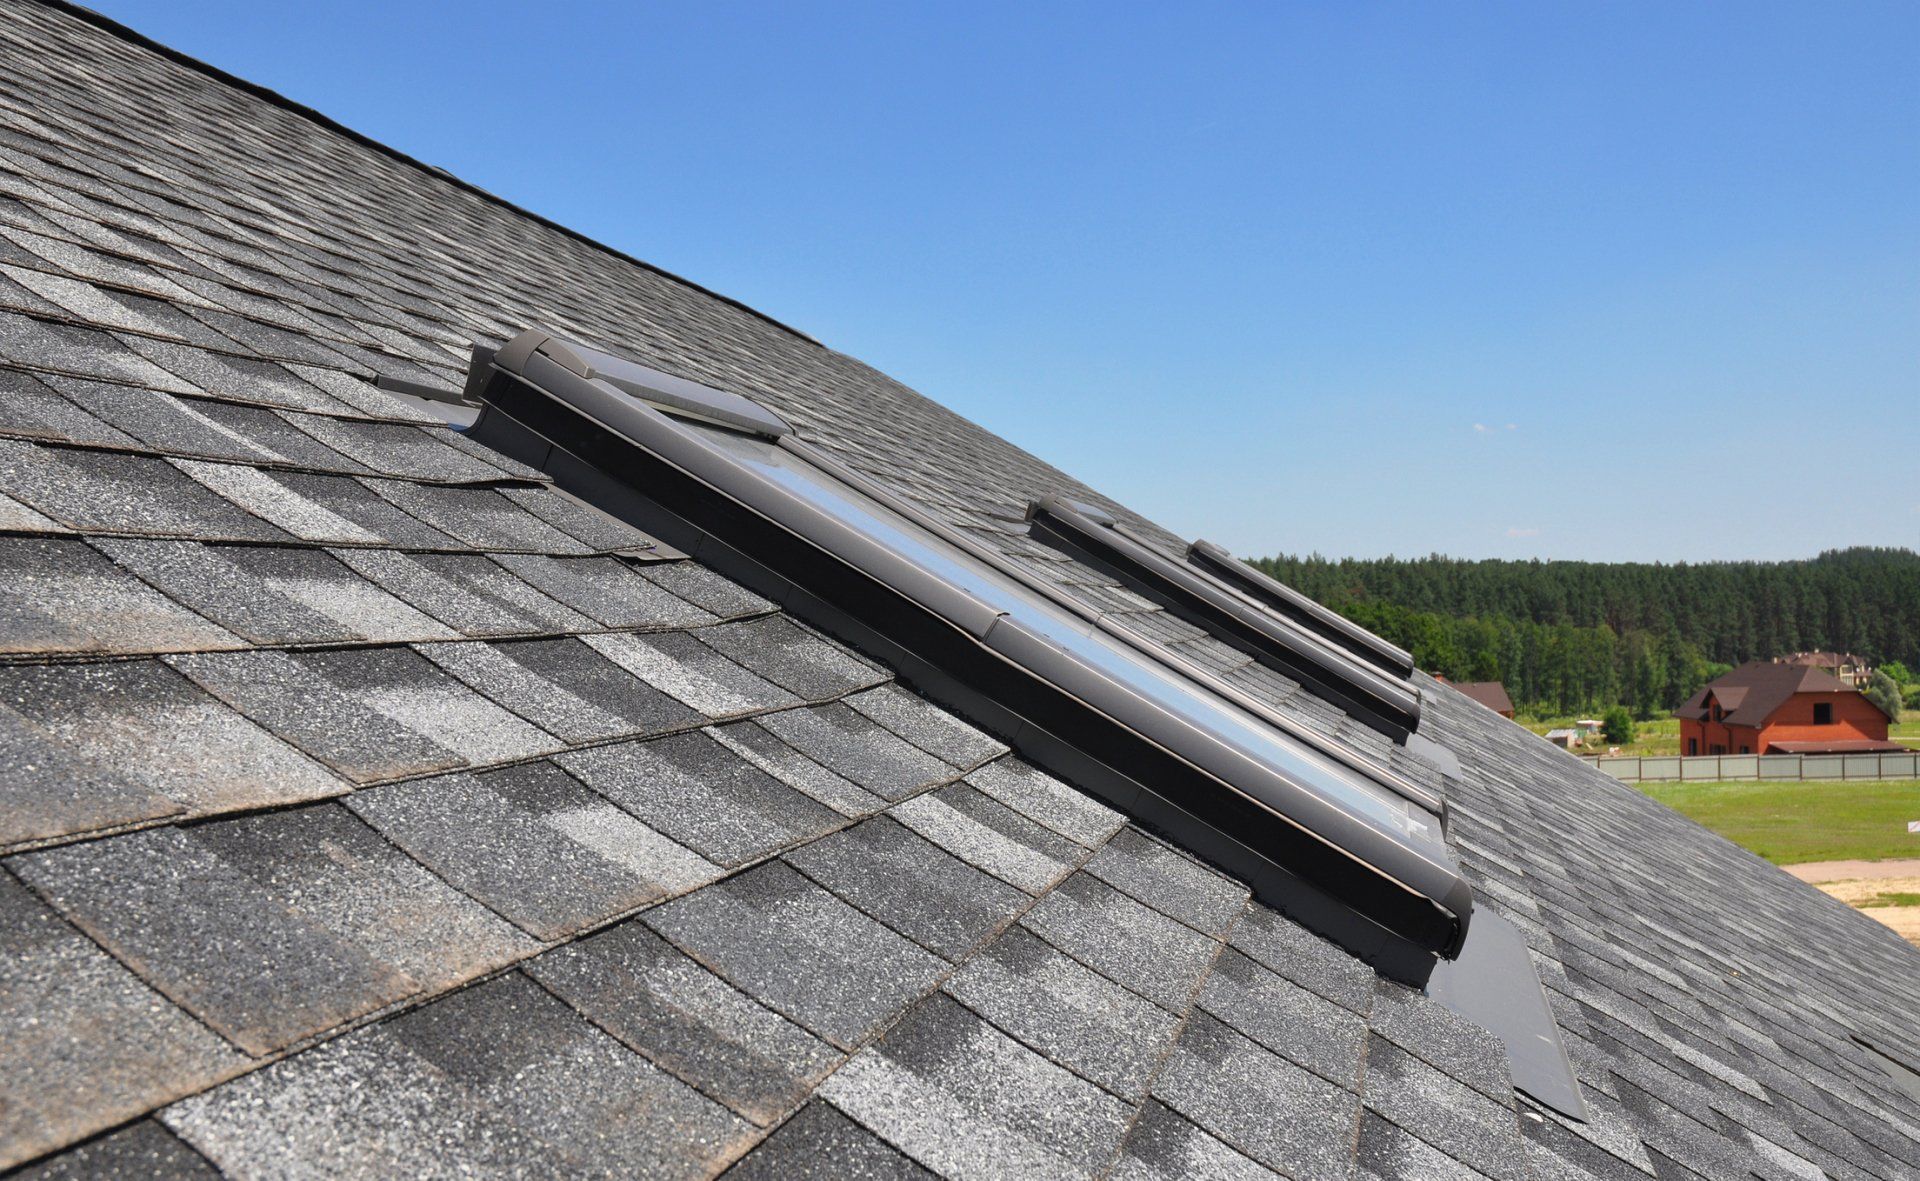 Composition Shingle Roof - Service Roofing Co. - Fullerton, CA